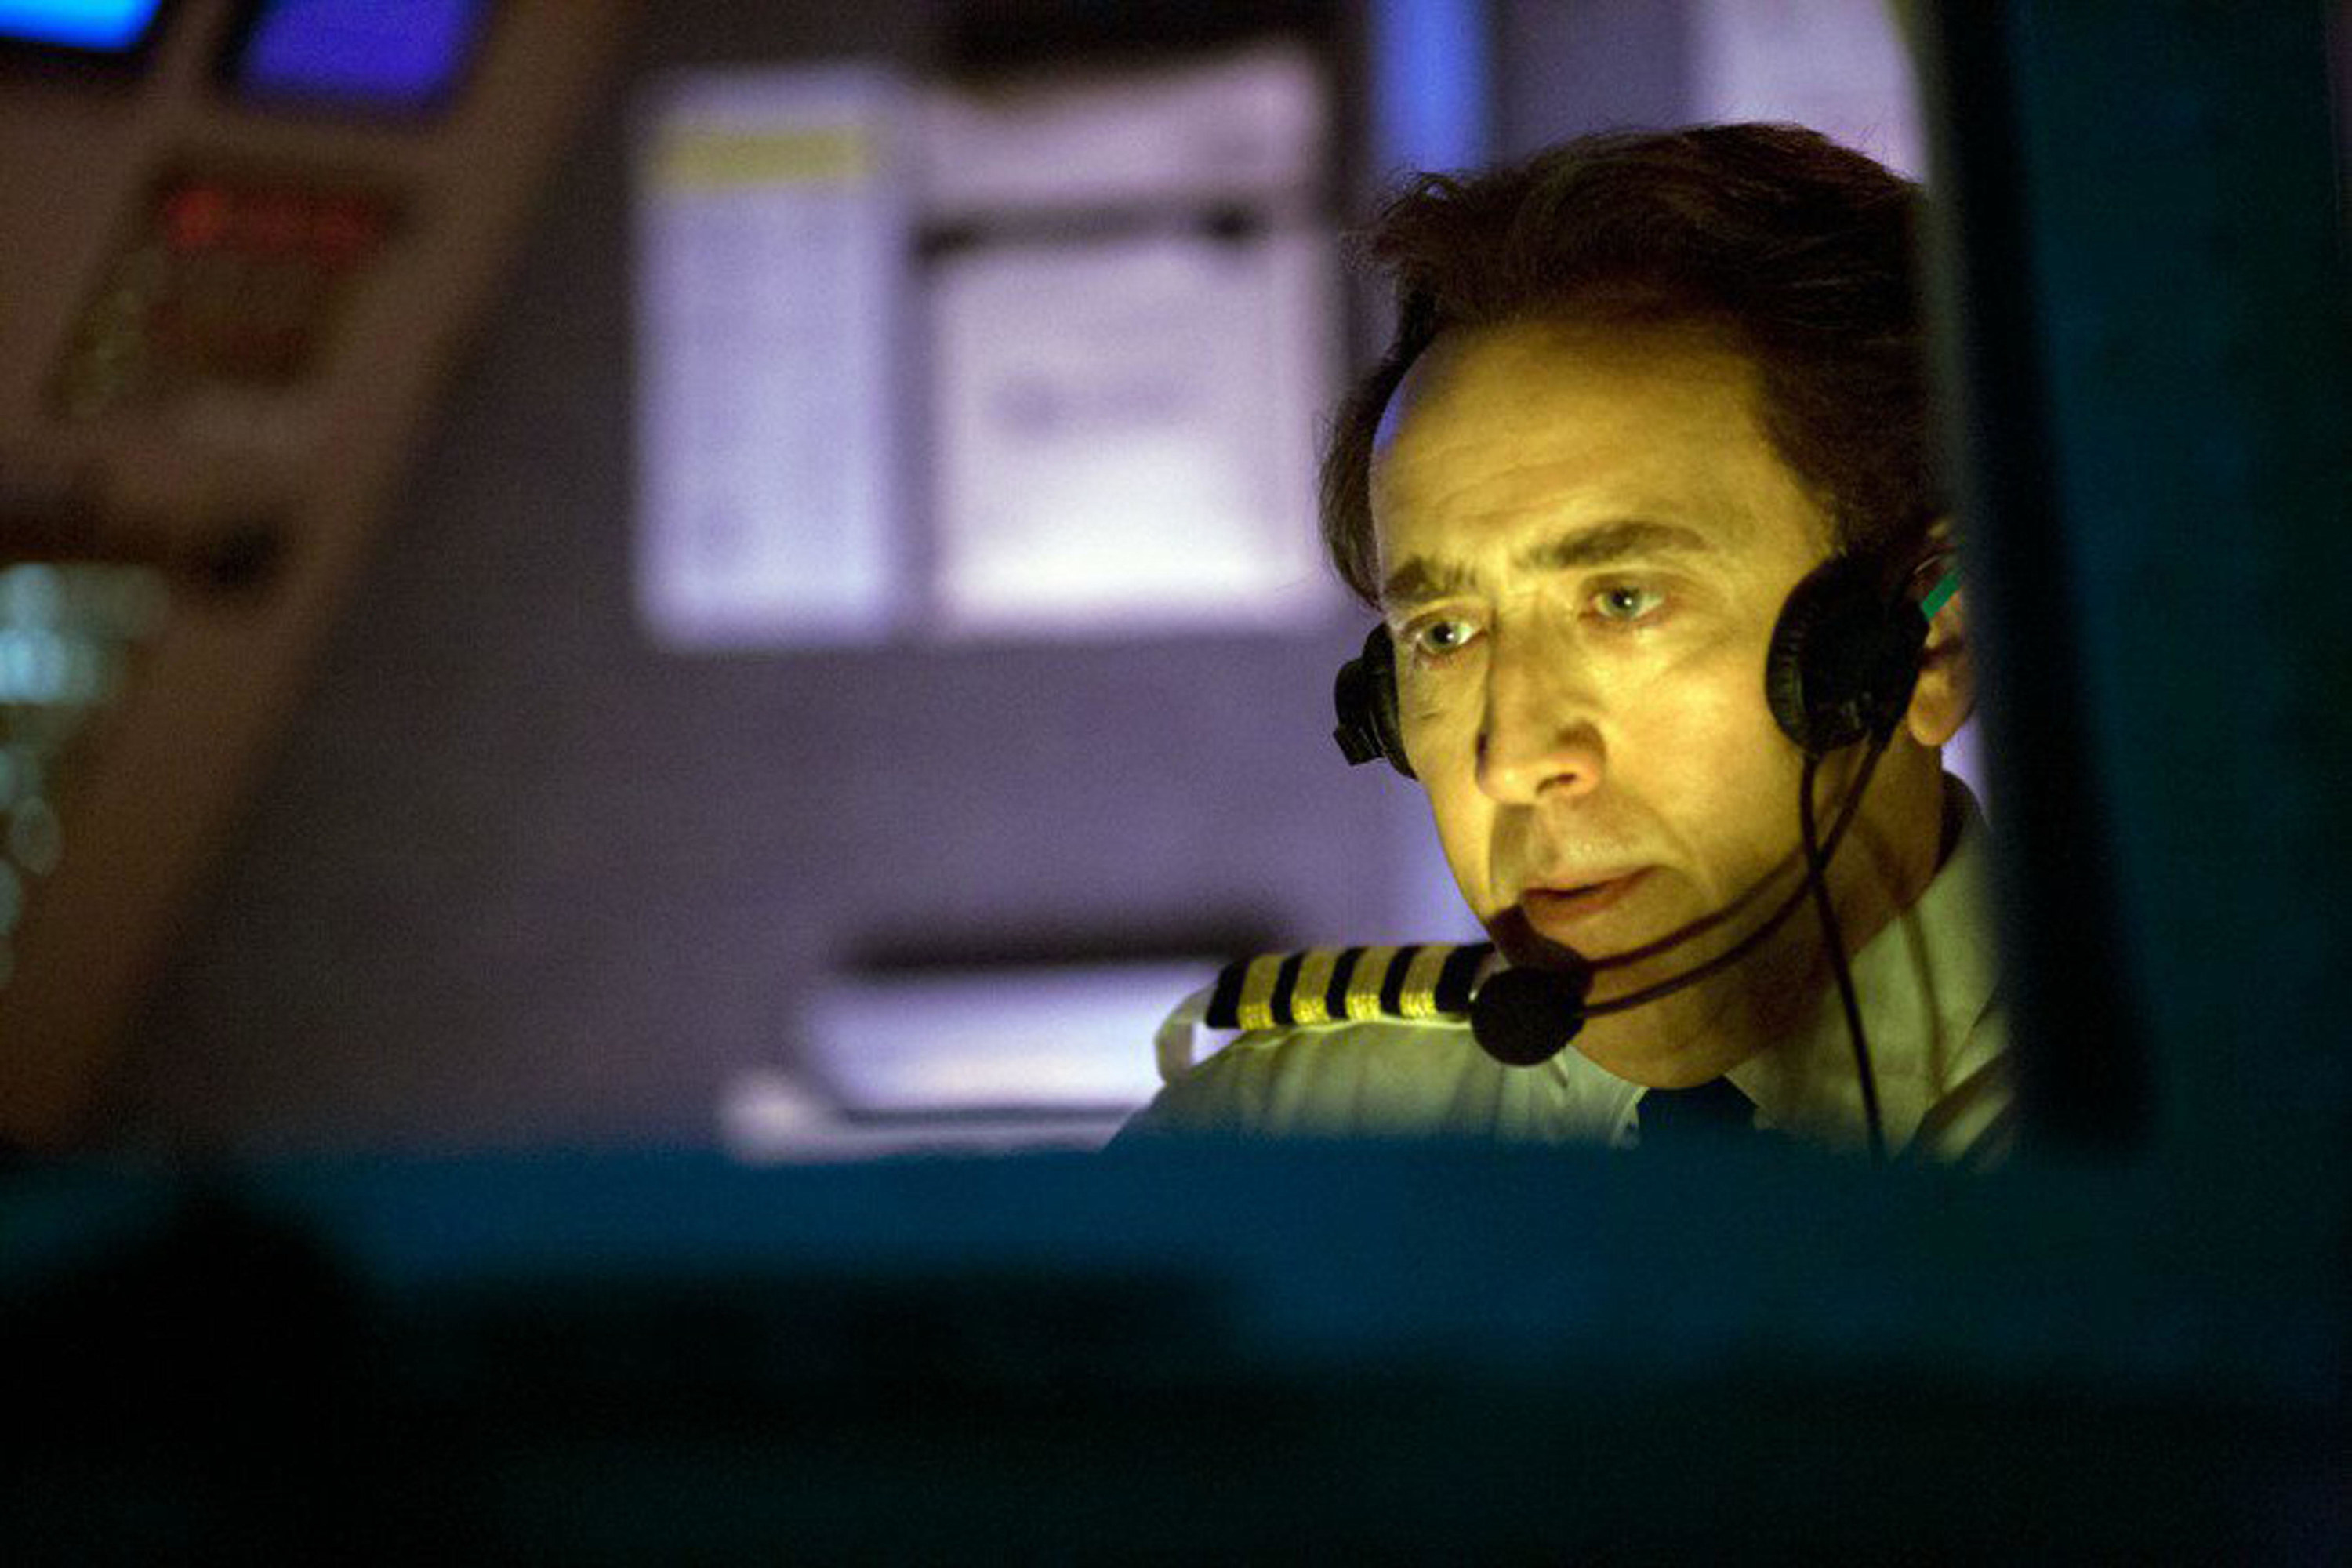 Nicolas Cage sits in an airplane cockpit